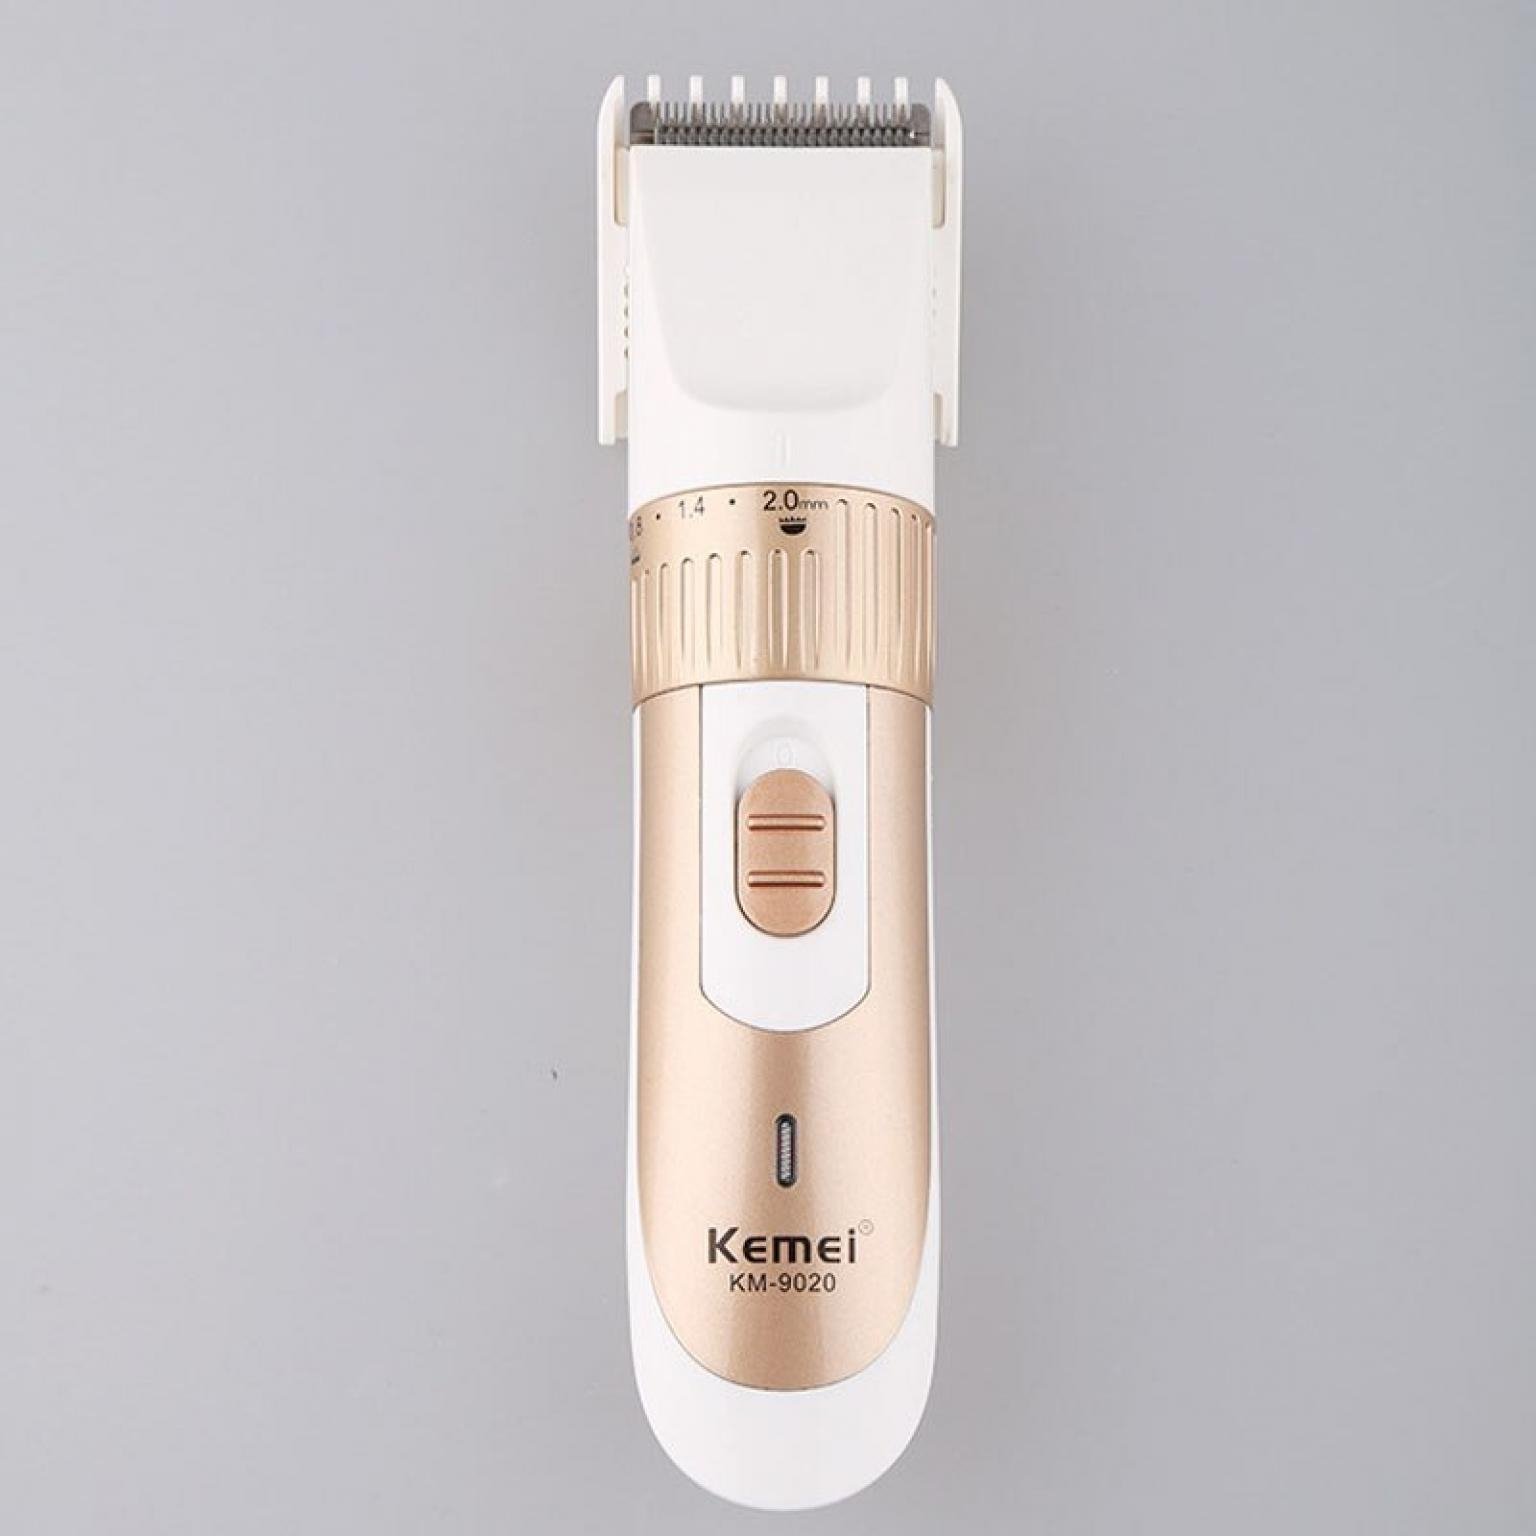 Kemei KM-9020 Electric Hair Clipper Rechargeable Beard Trimmer Shaver Professional Electric Hair Clipper